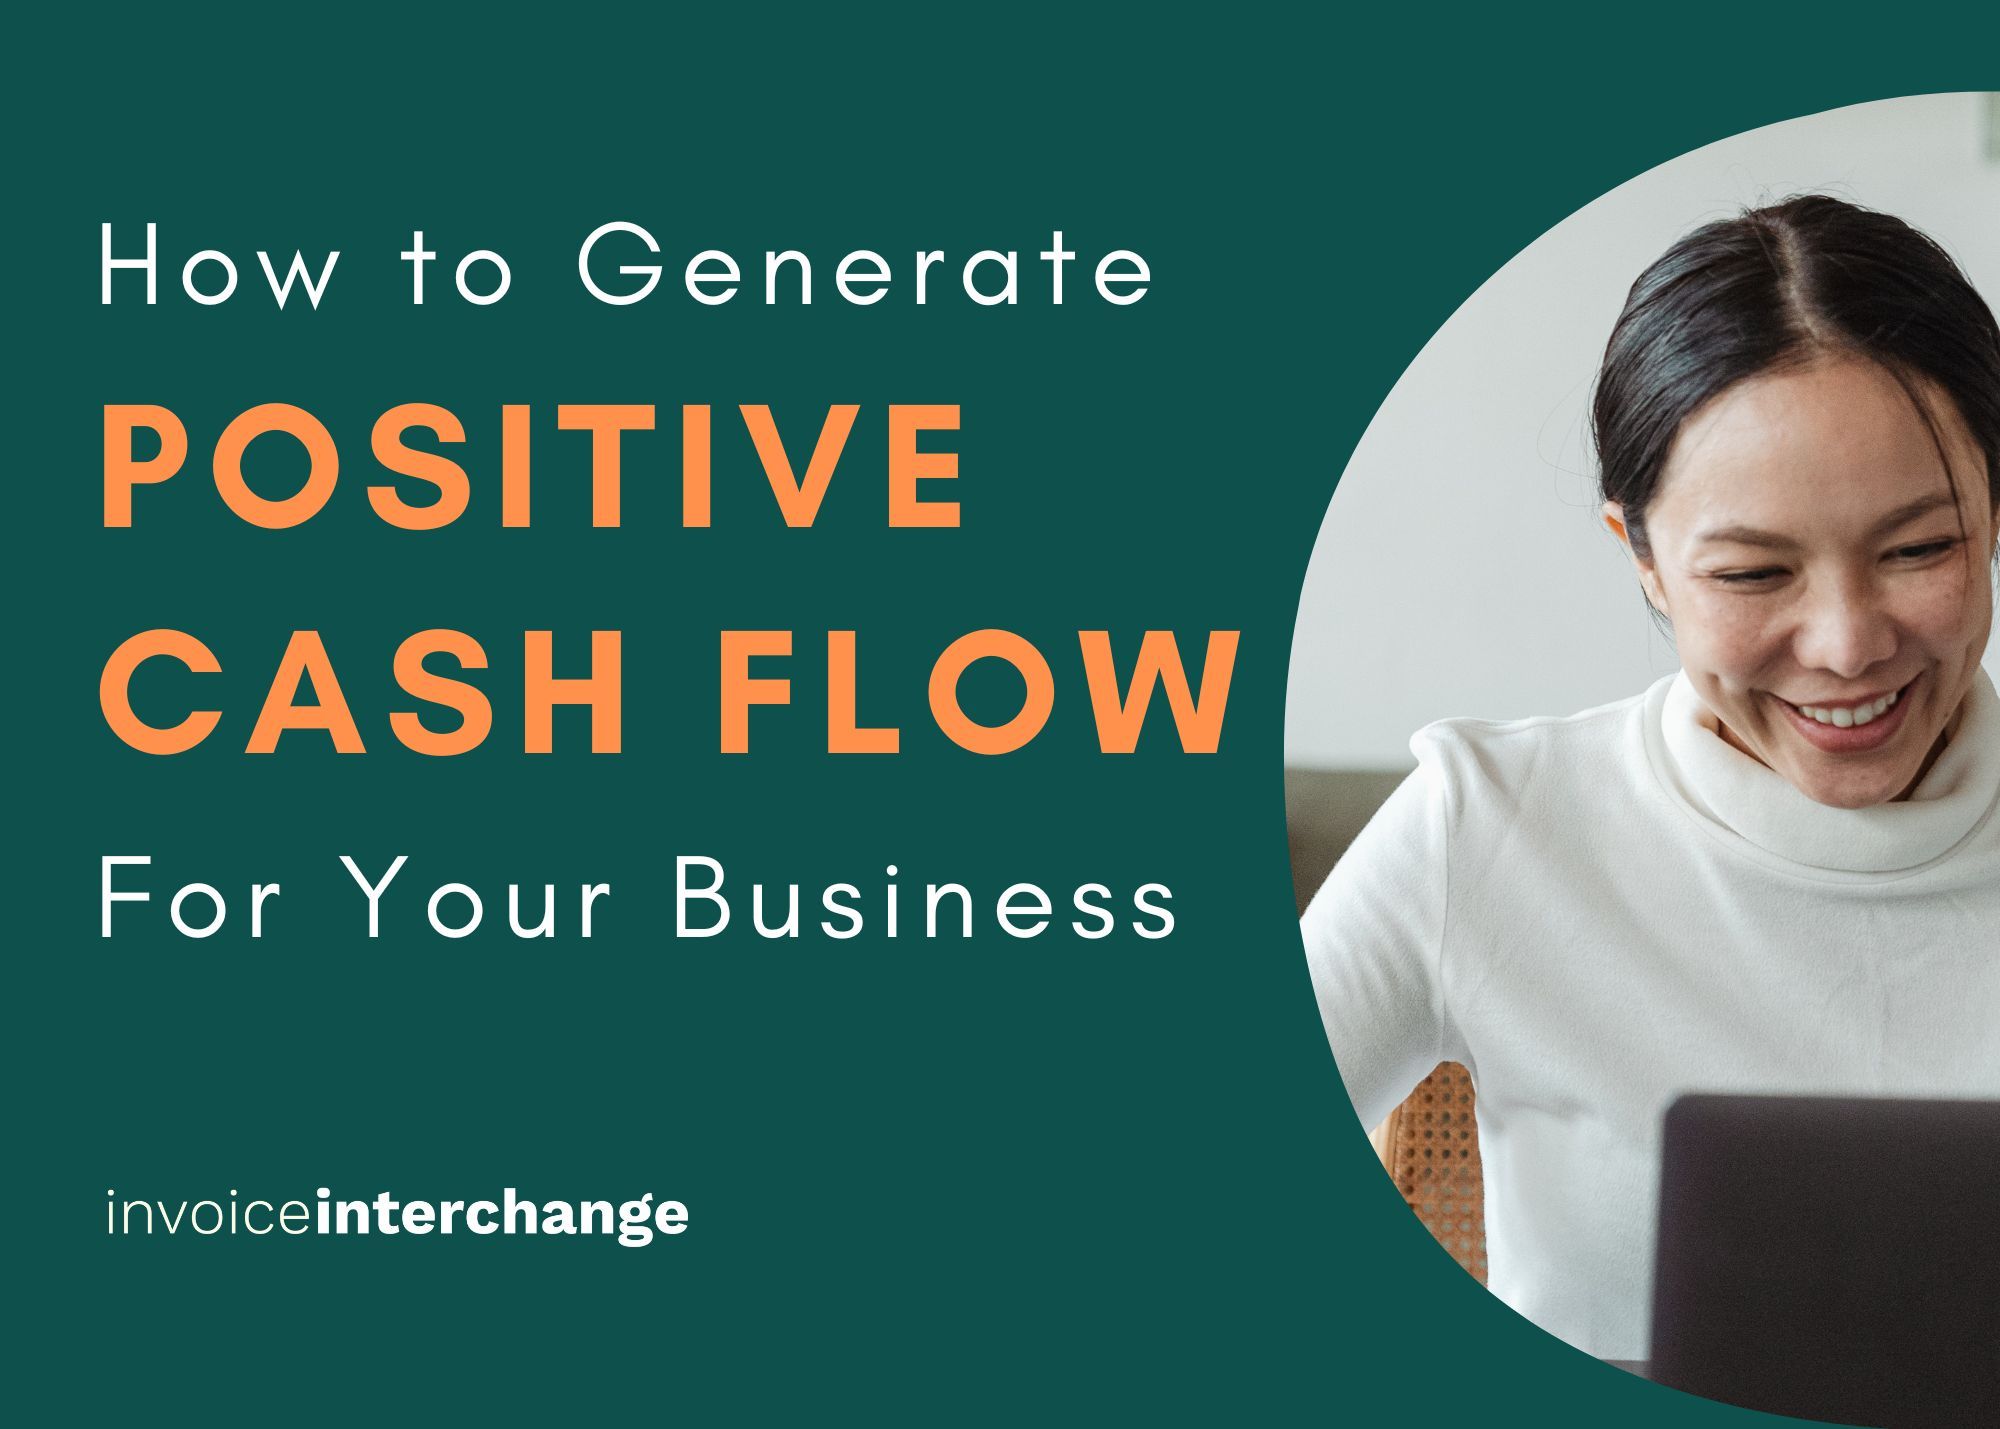 How to Generate a Positive Cash Flow For Your Business